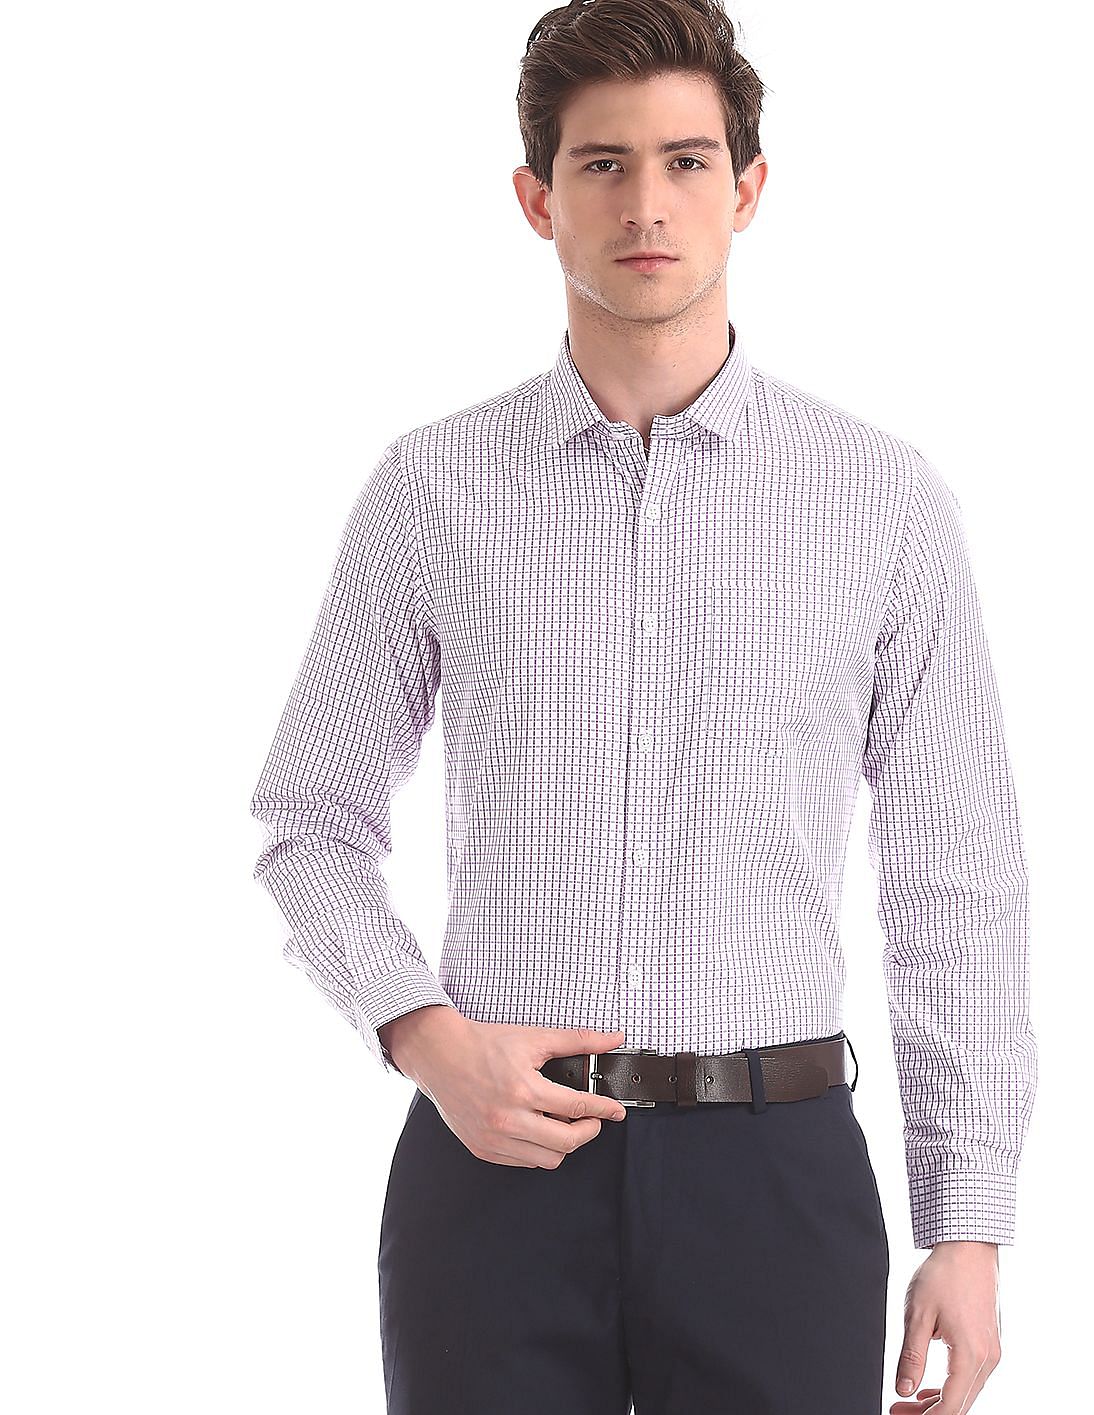 Buy Excalibur by Unlimited Purple Mitered Cuff Check Shirt - NNNOW.com